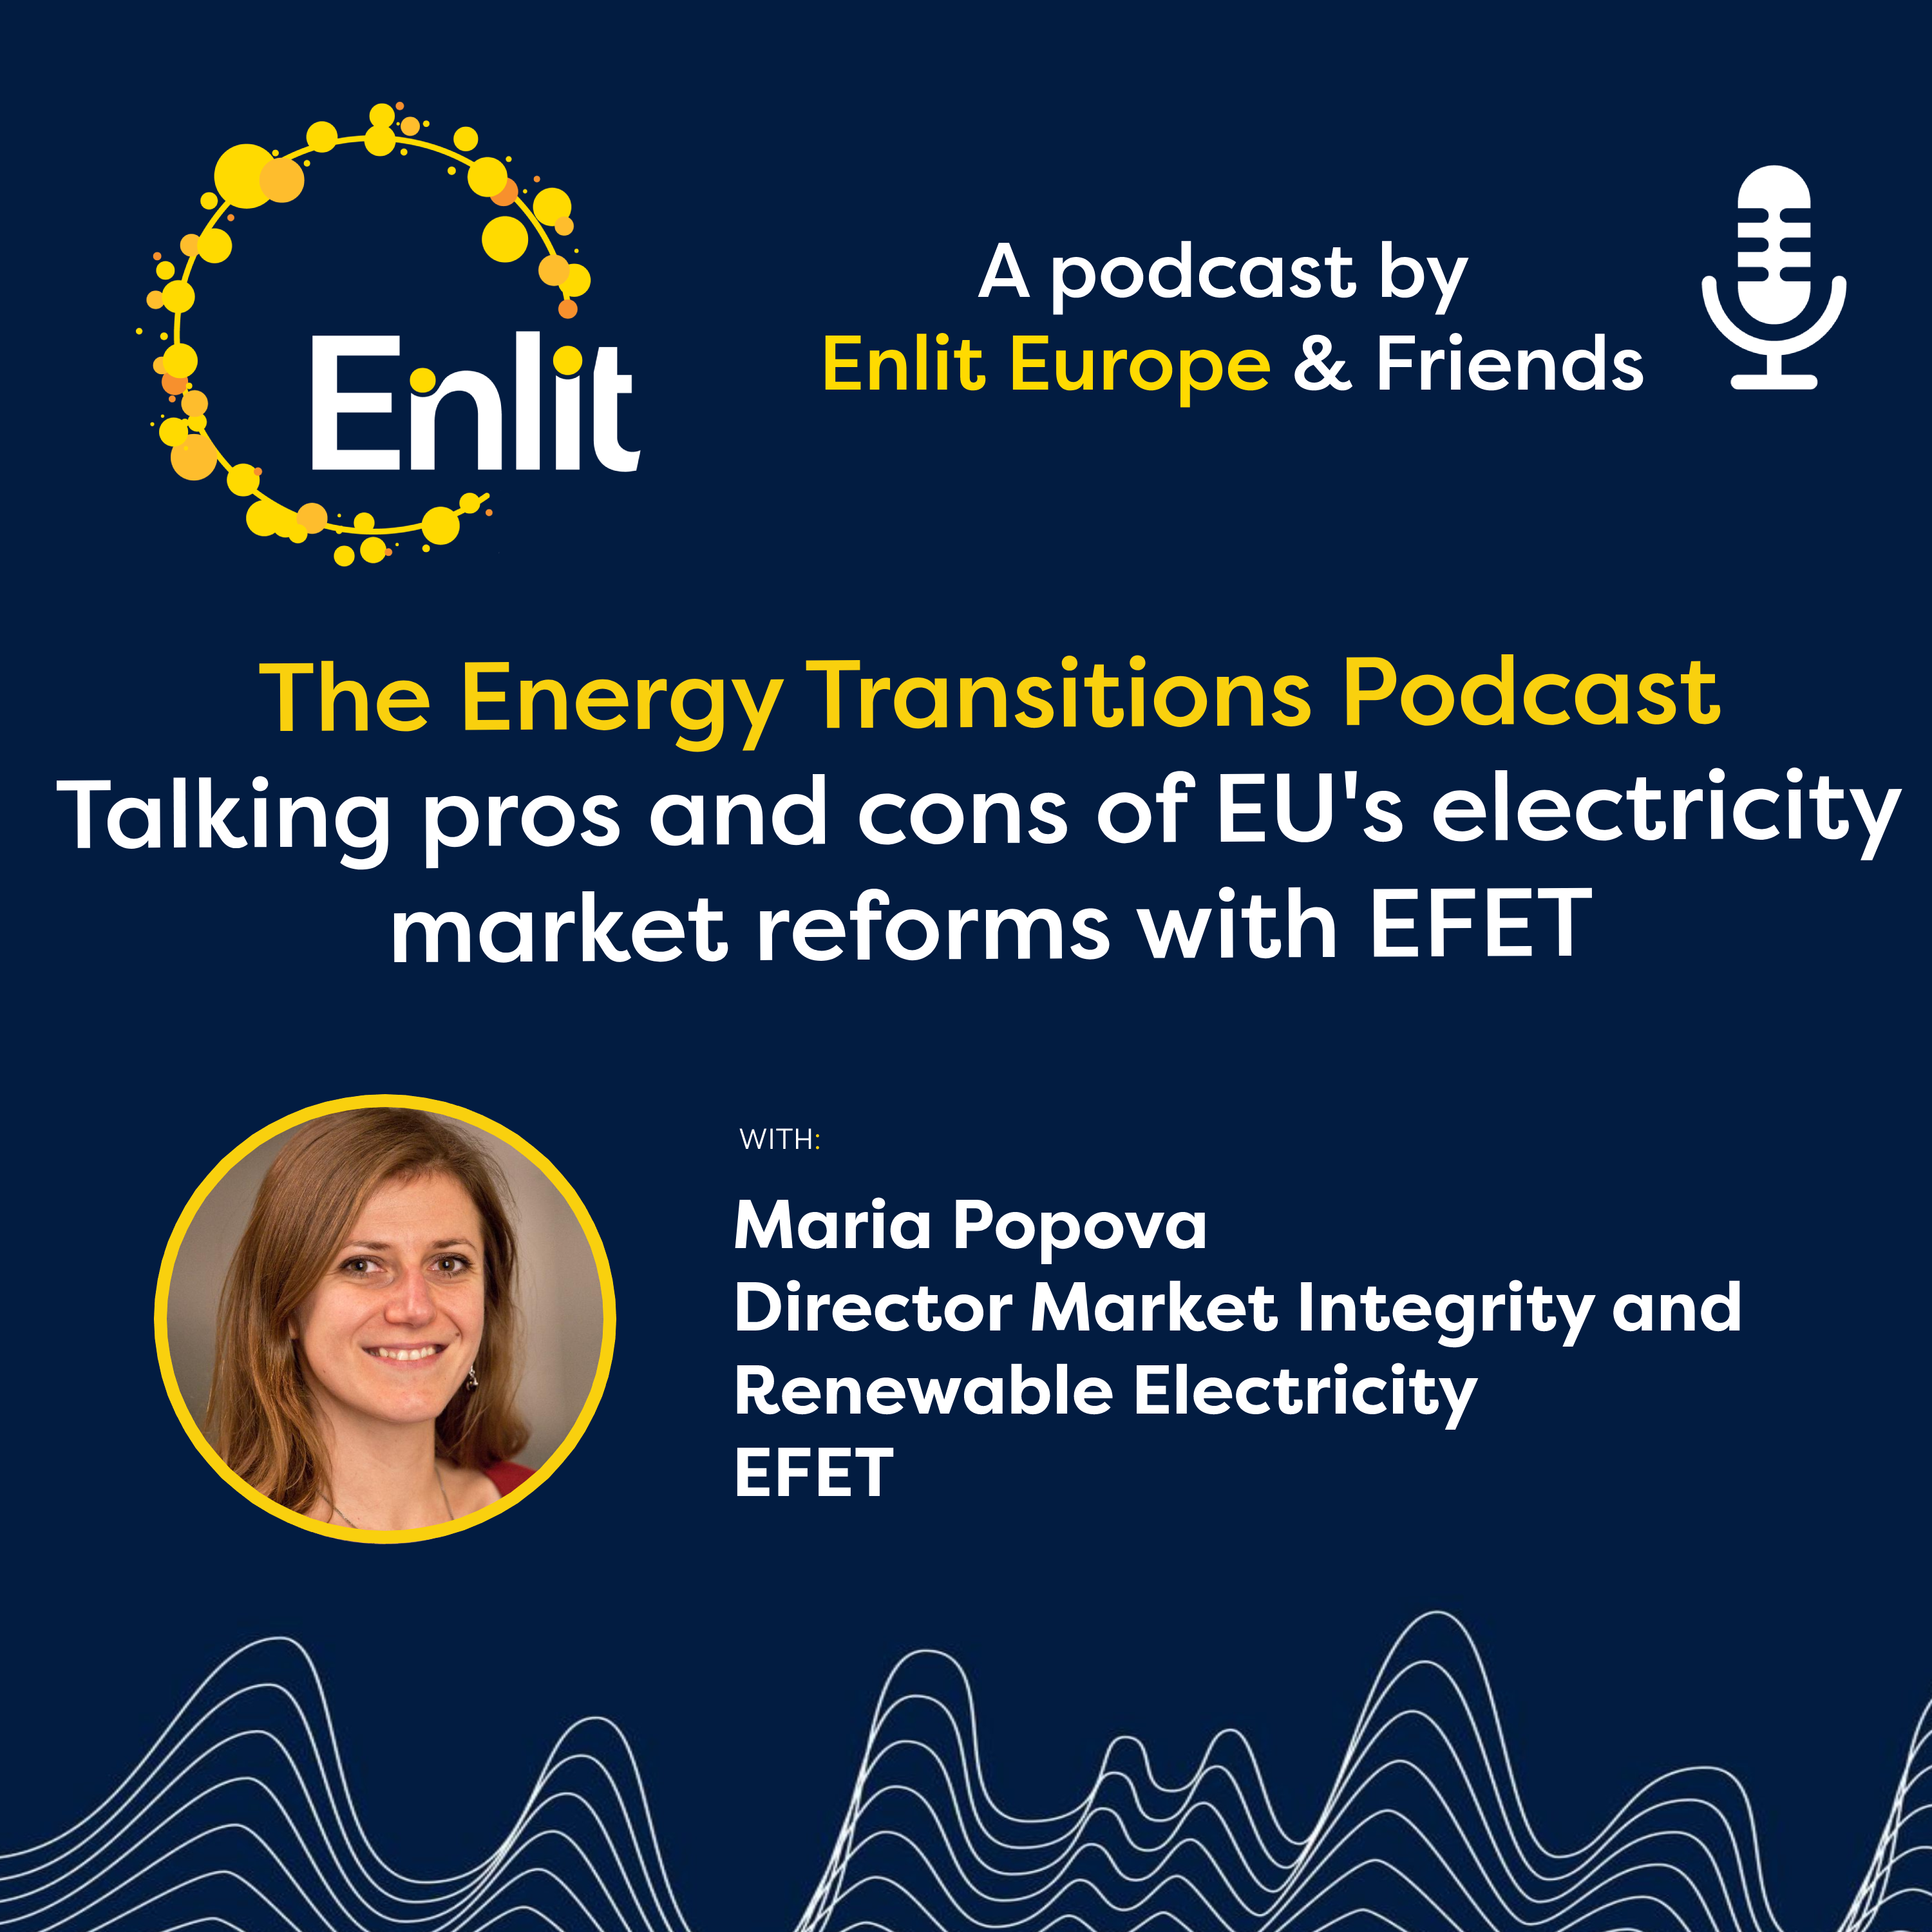 Talking pros and cons of EU's electricity market reforms with EFET